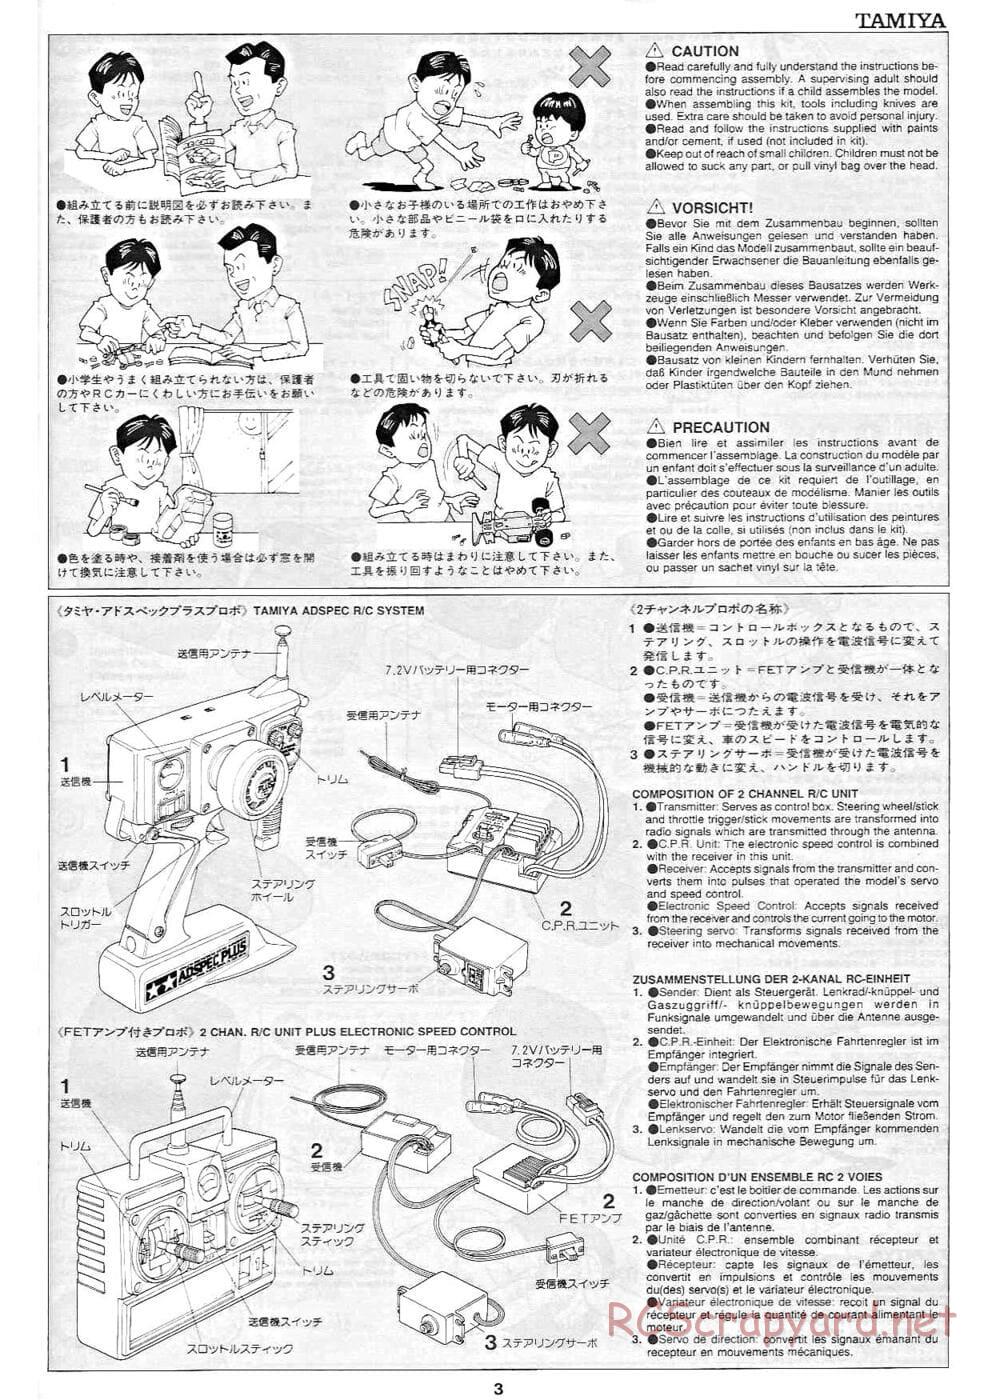 Tamiya - Toyota GT-One TS020 - F103RS Chassis - Manual - Page 3